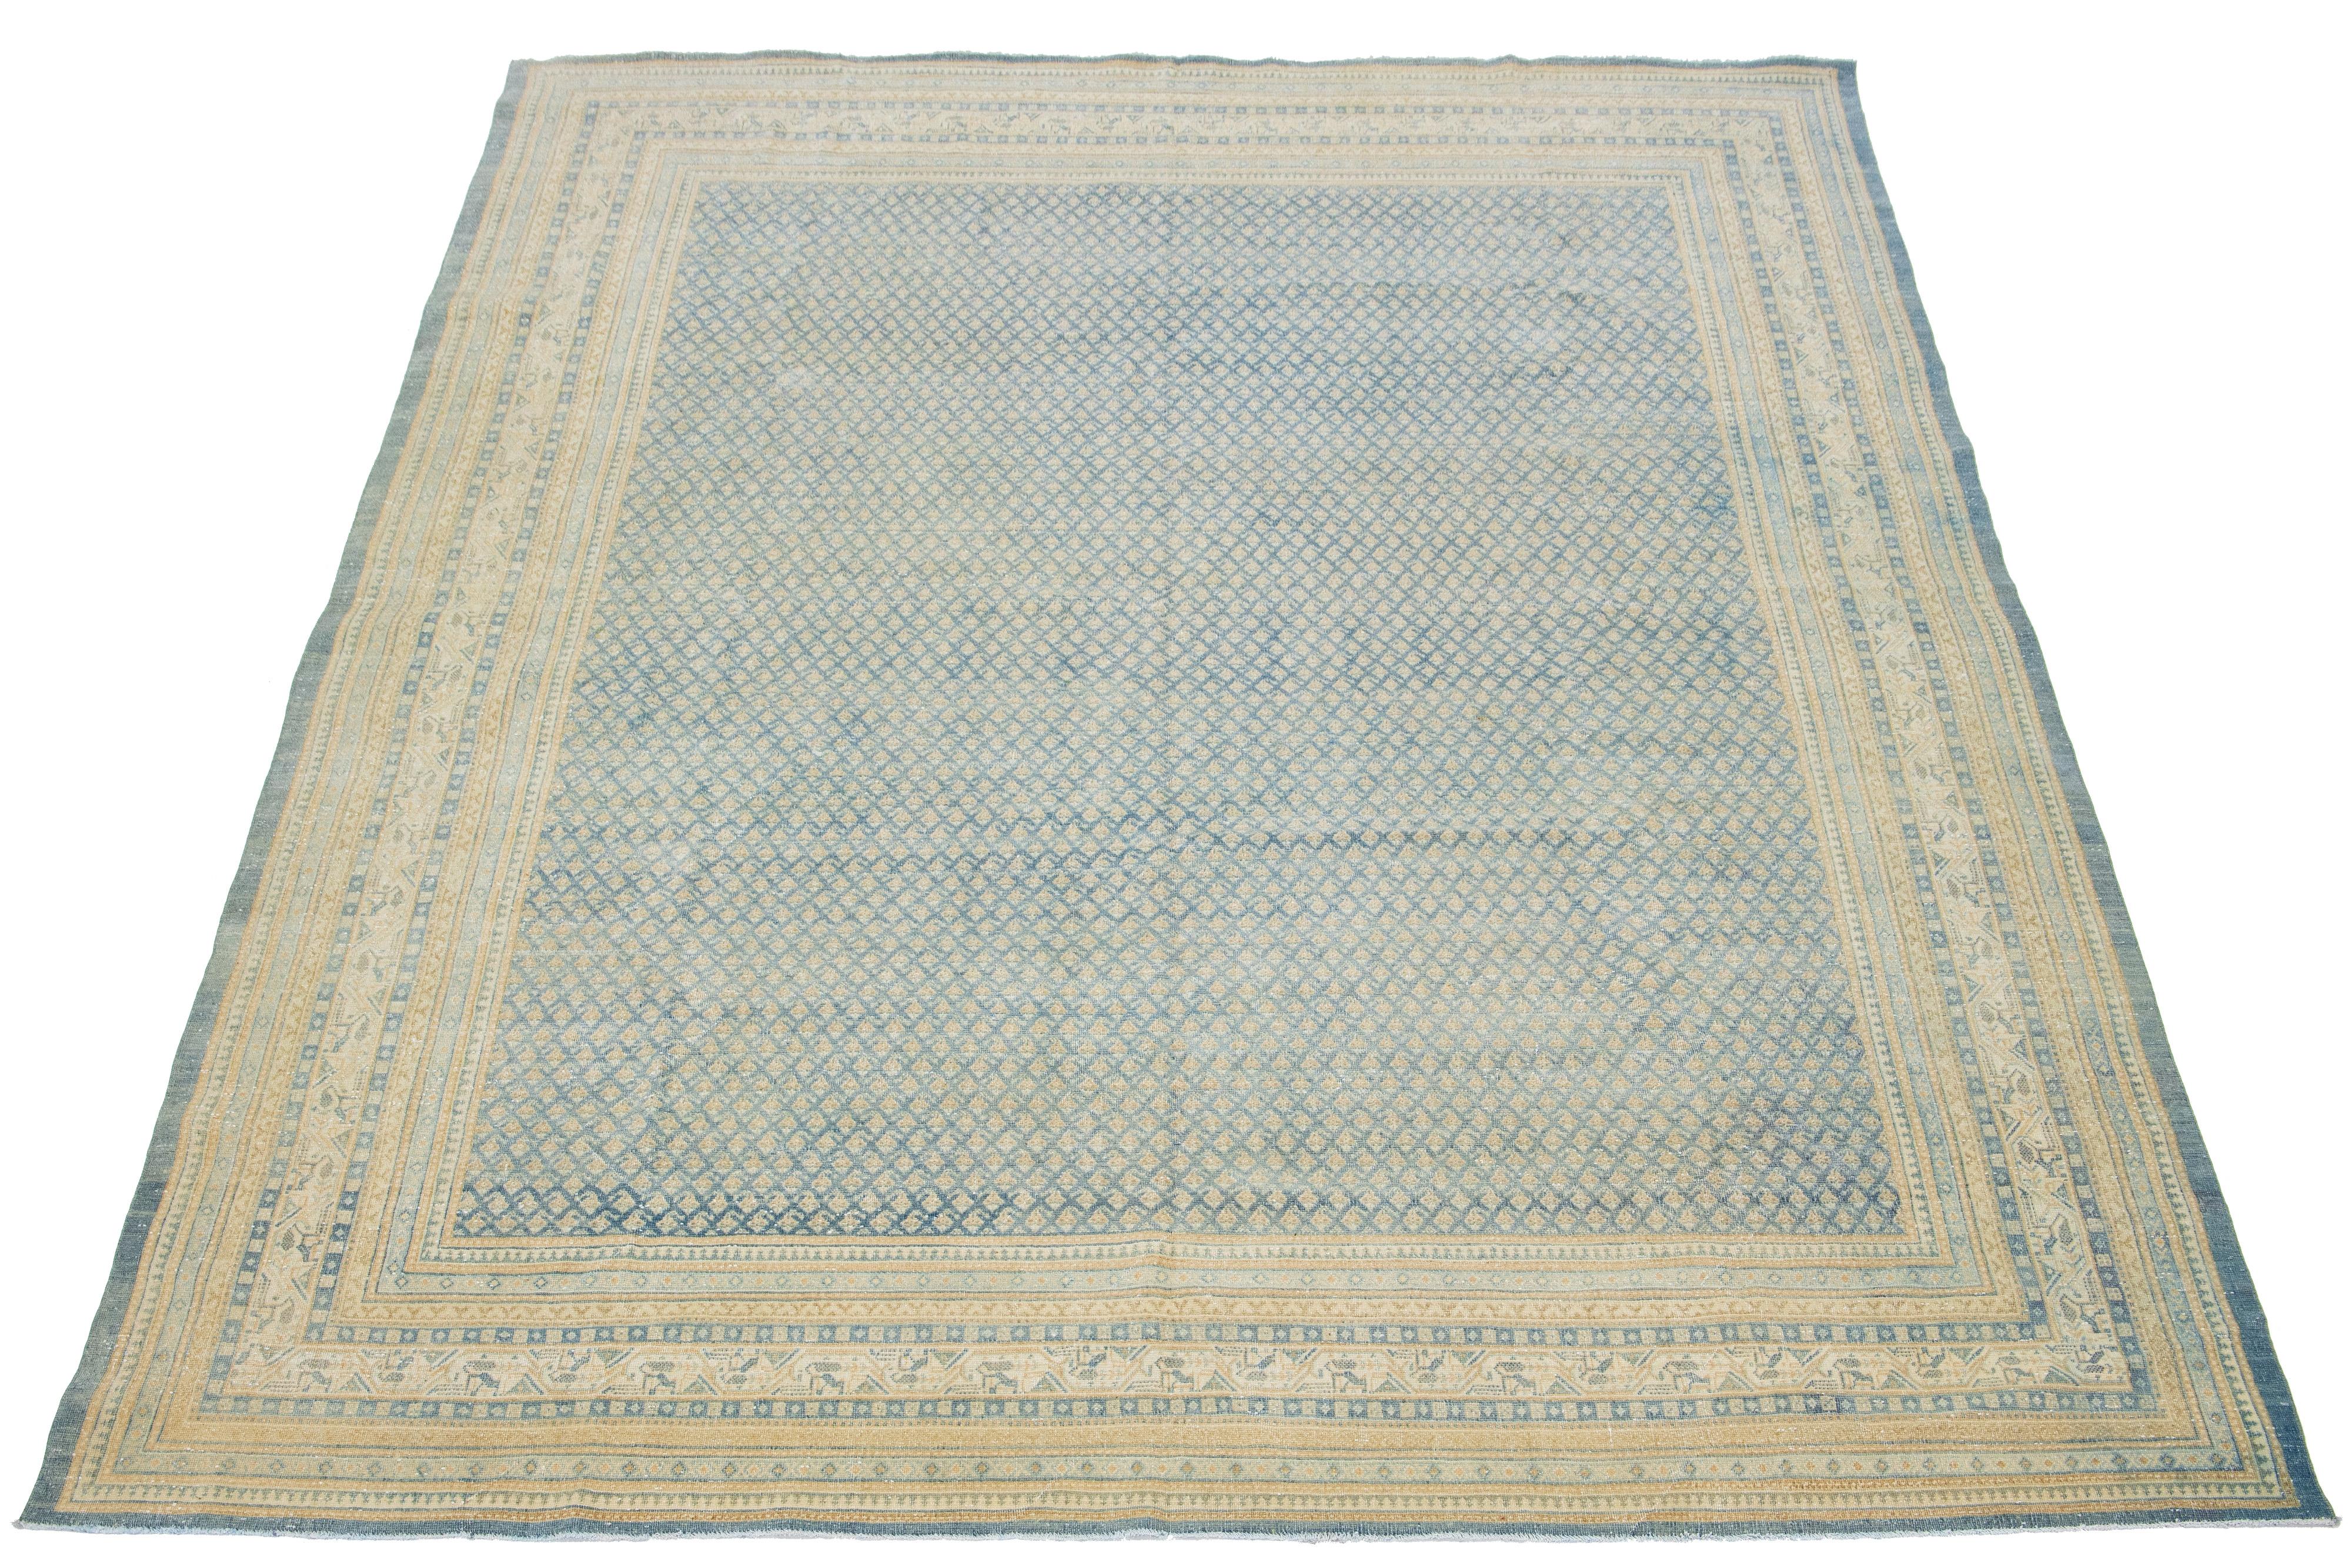 This Persian Tabriz wool rug from the 1920s showcases a handcrafted, traditional allover pattern. The contrasting light blue background and beige colors accentuate the design.

This rug measures 8'9' x 11'10